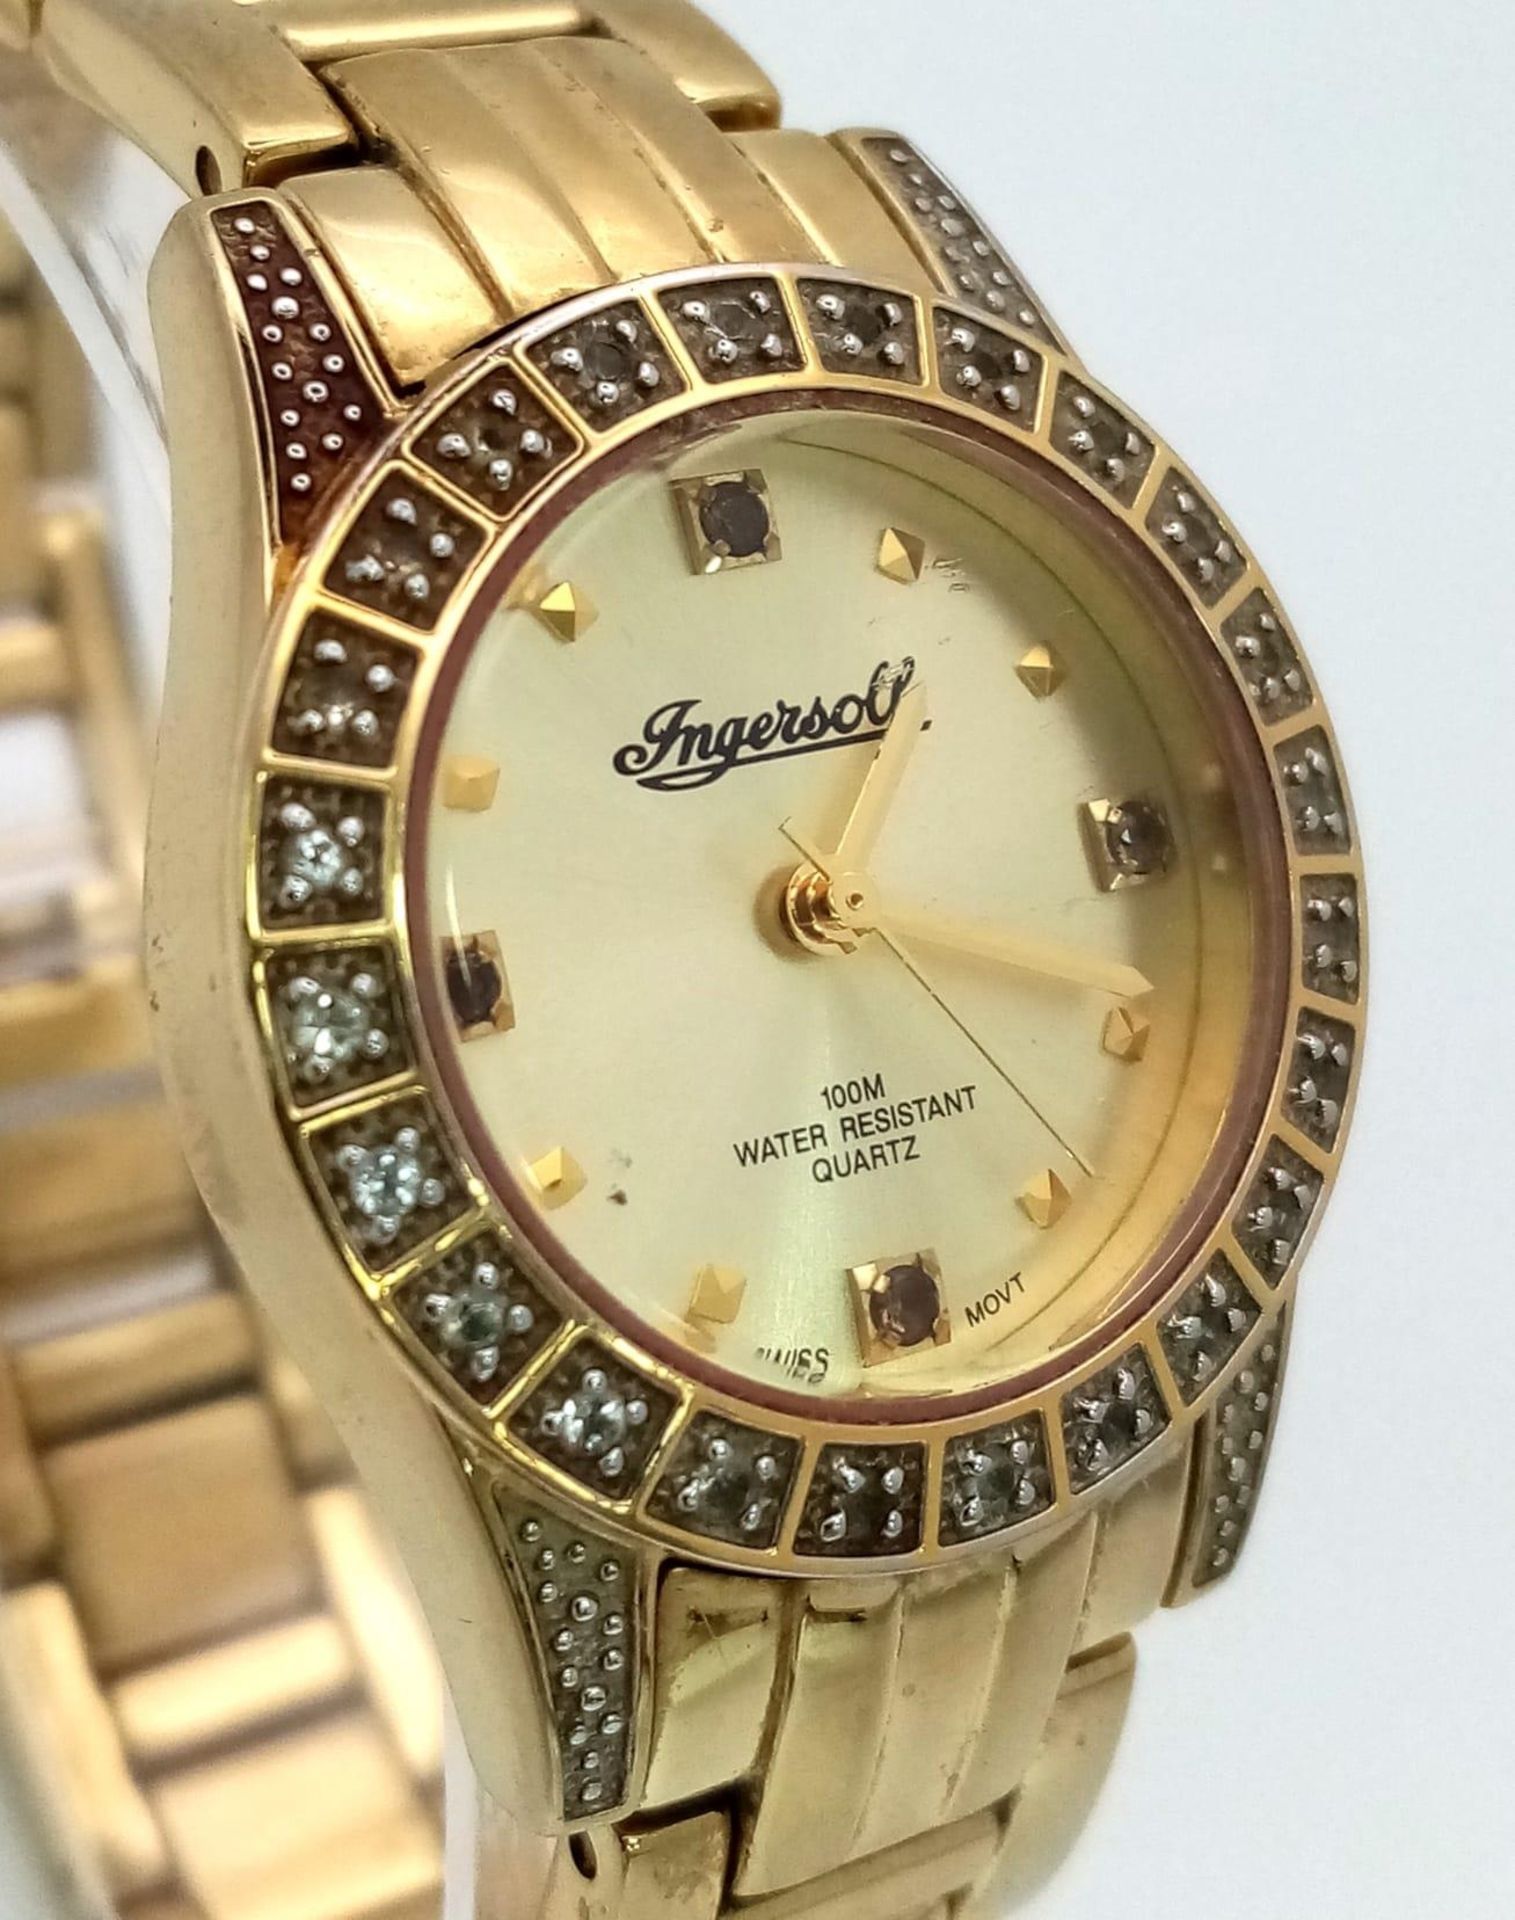 An Ingersoll Gold Plated Ladies Quartz Watch. Gold plated bracelet and case - 28mm. Gold tone dial - Image 3 of 5